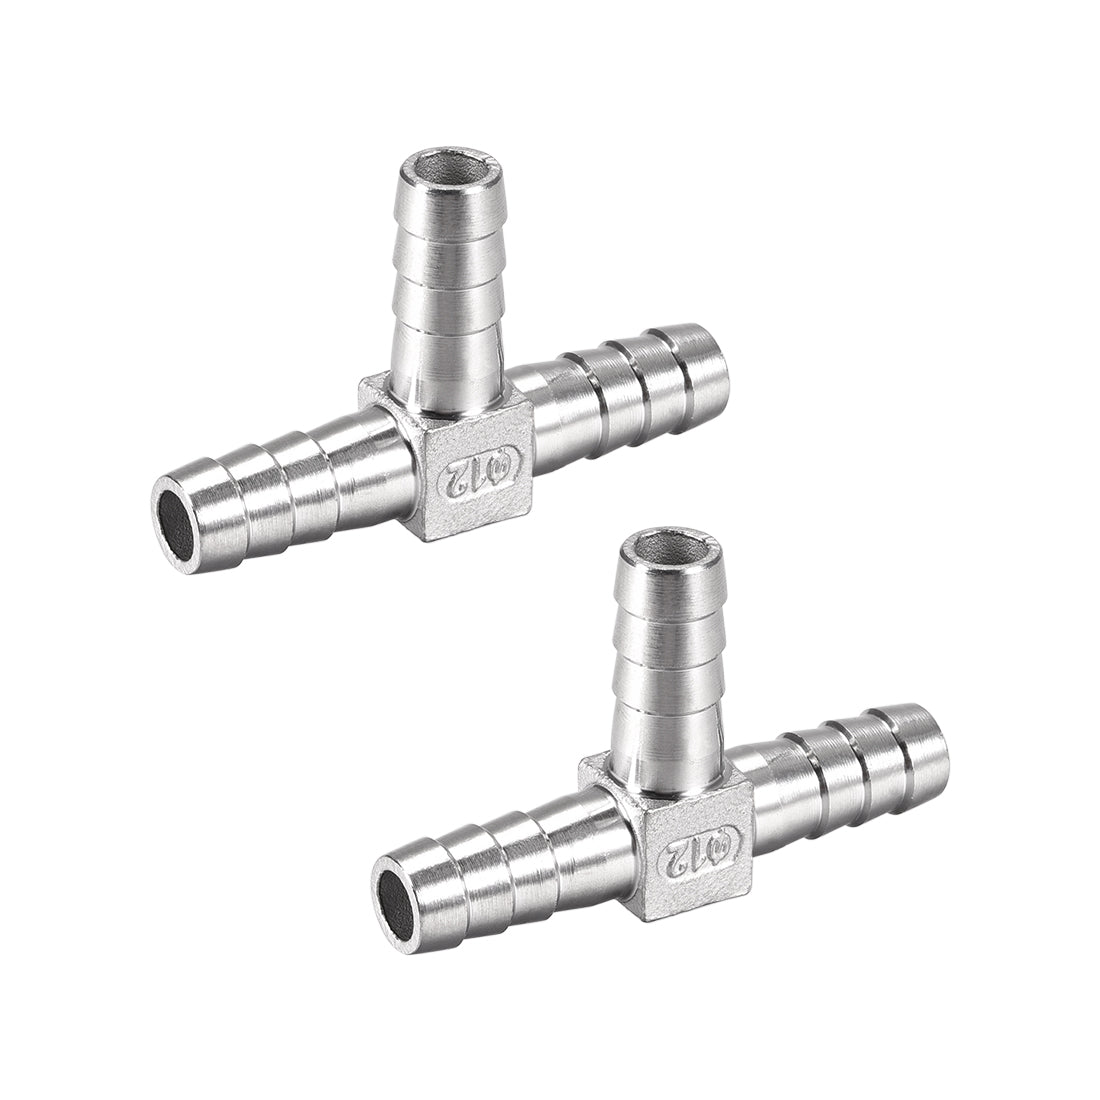 uxcell Uxcell 15/32-Inch (12mm) Hose ID Barb Fitting Stainless Steel 3 Way T-Shaped Union Home Brew Fitting 2pcs